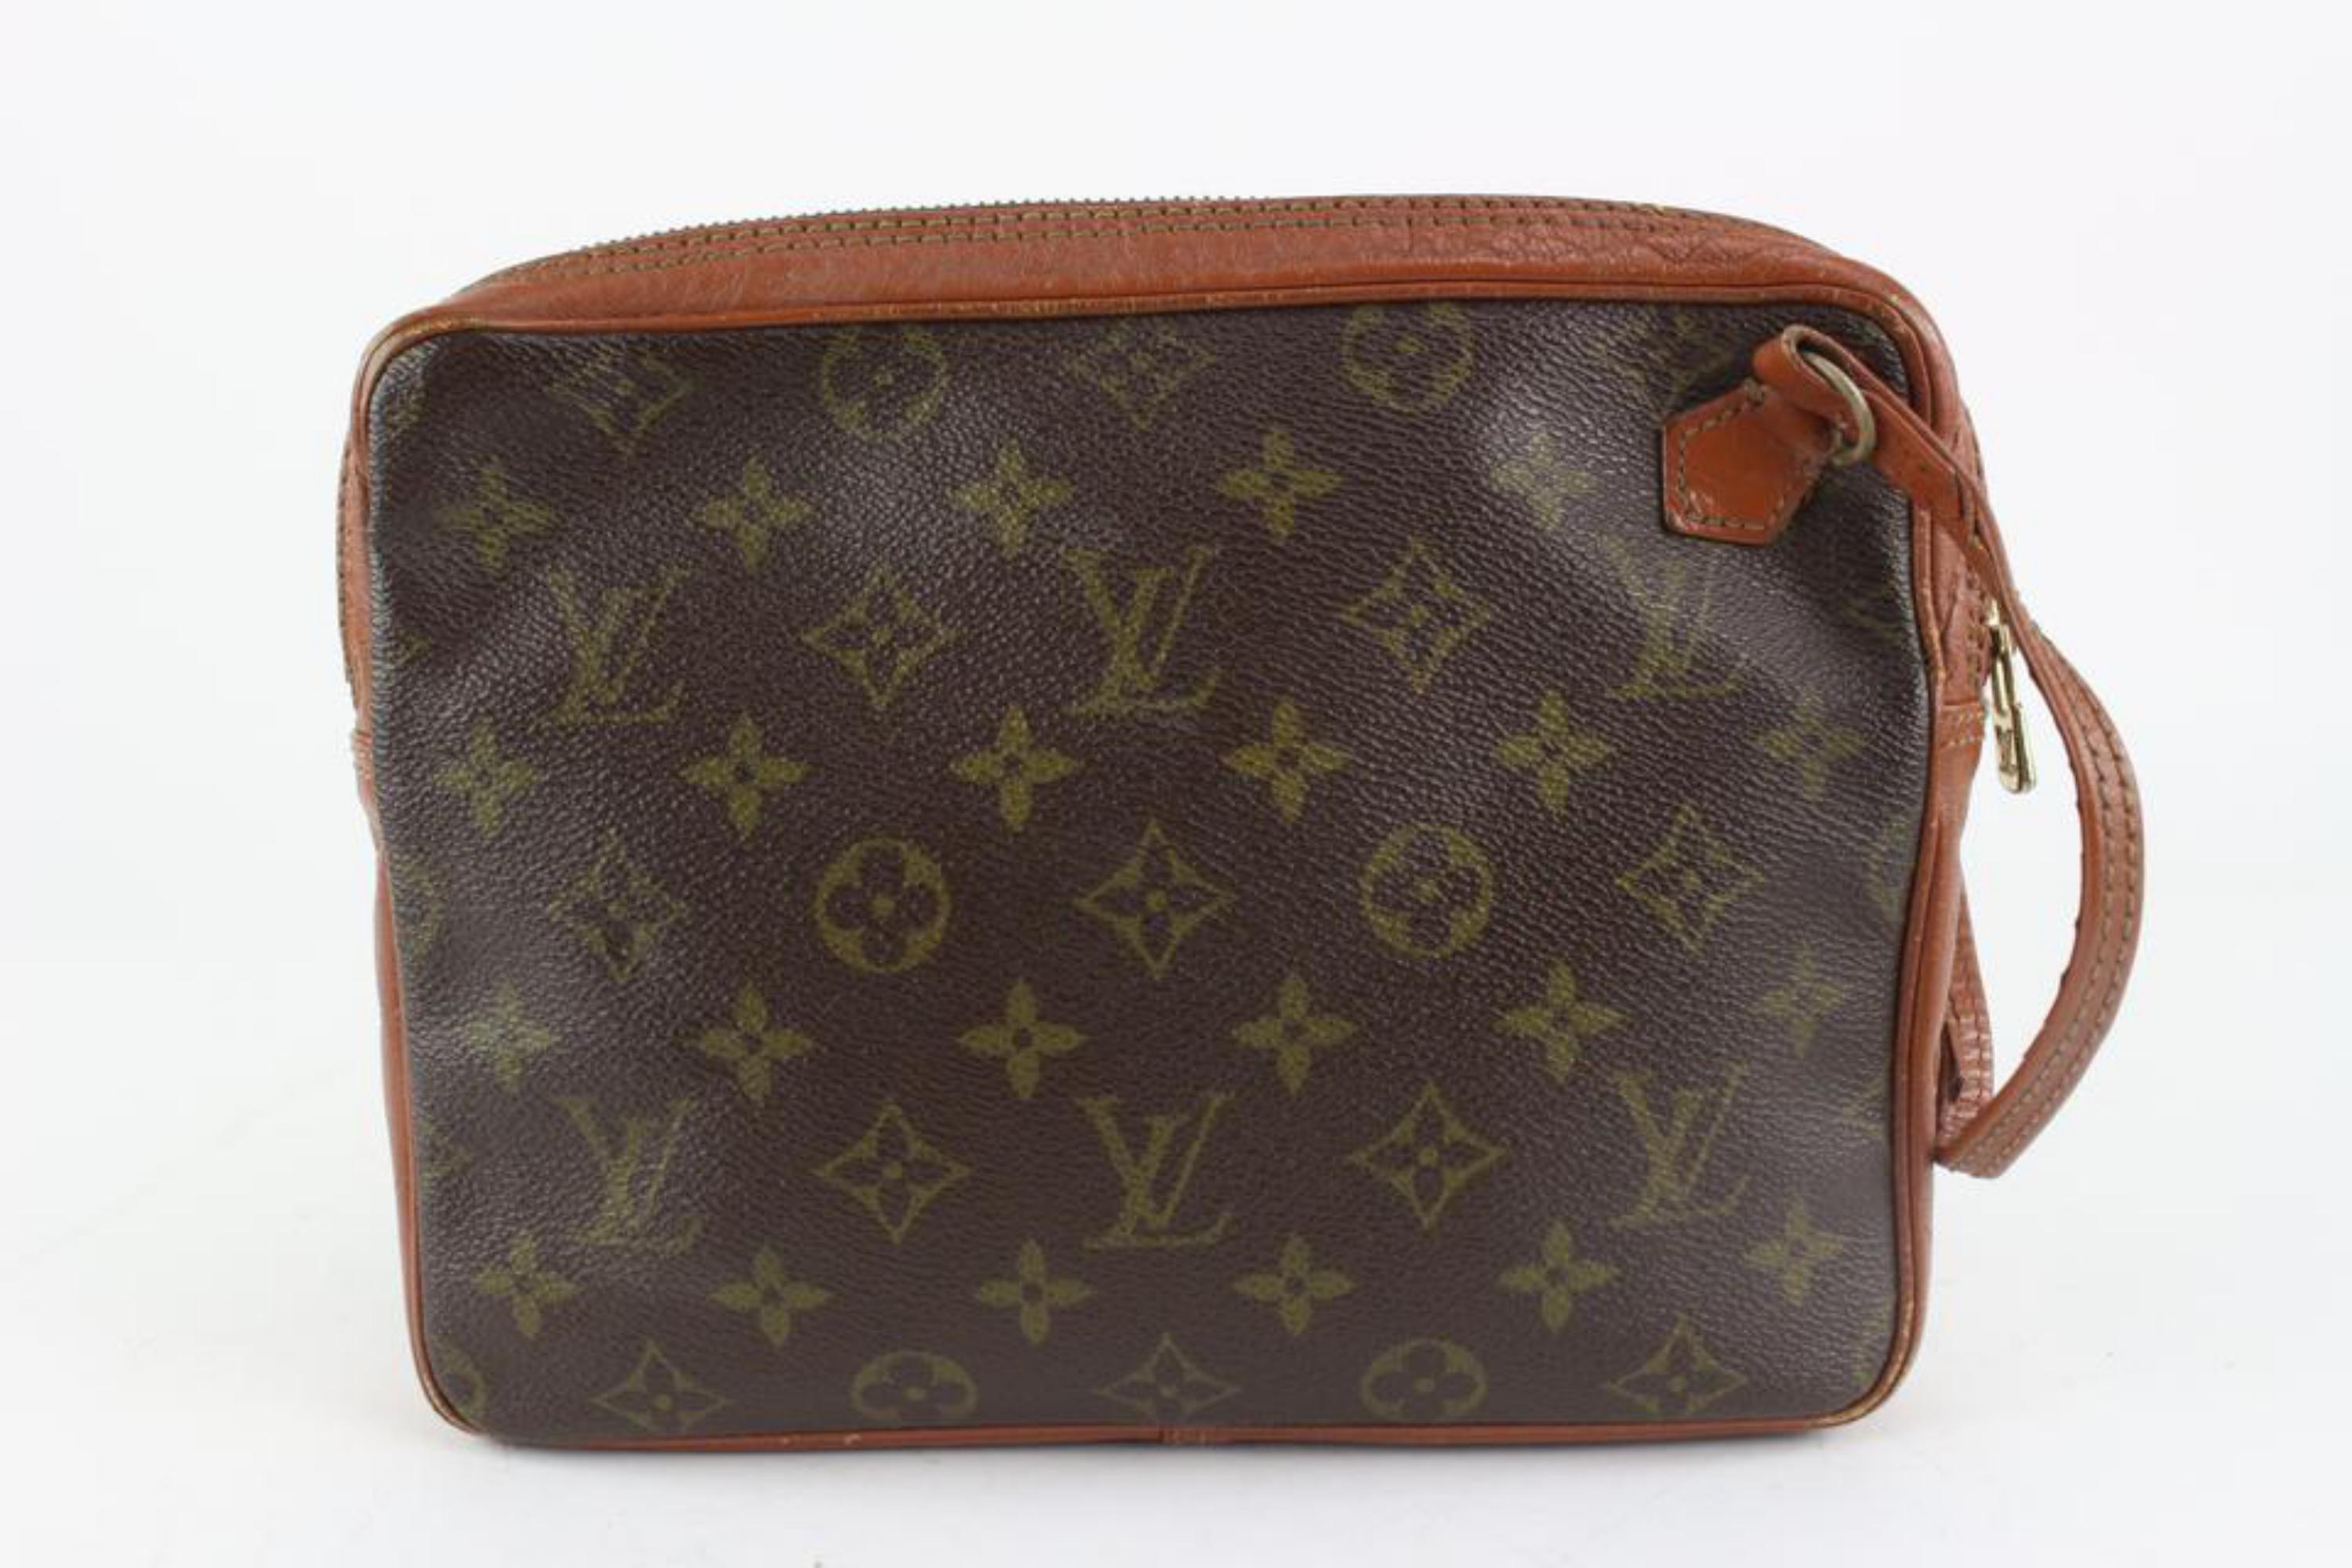 Louis Vuitton Monogram Pochette Marly Dragonne Wristlet Clutch Pouch 1216lv47
Date Code/Serial Number: 822
Made In: France
Measurements: Length:  9.5